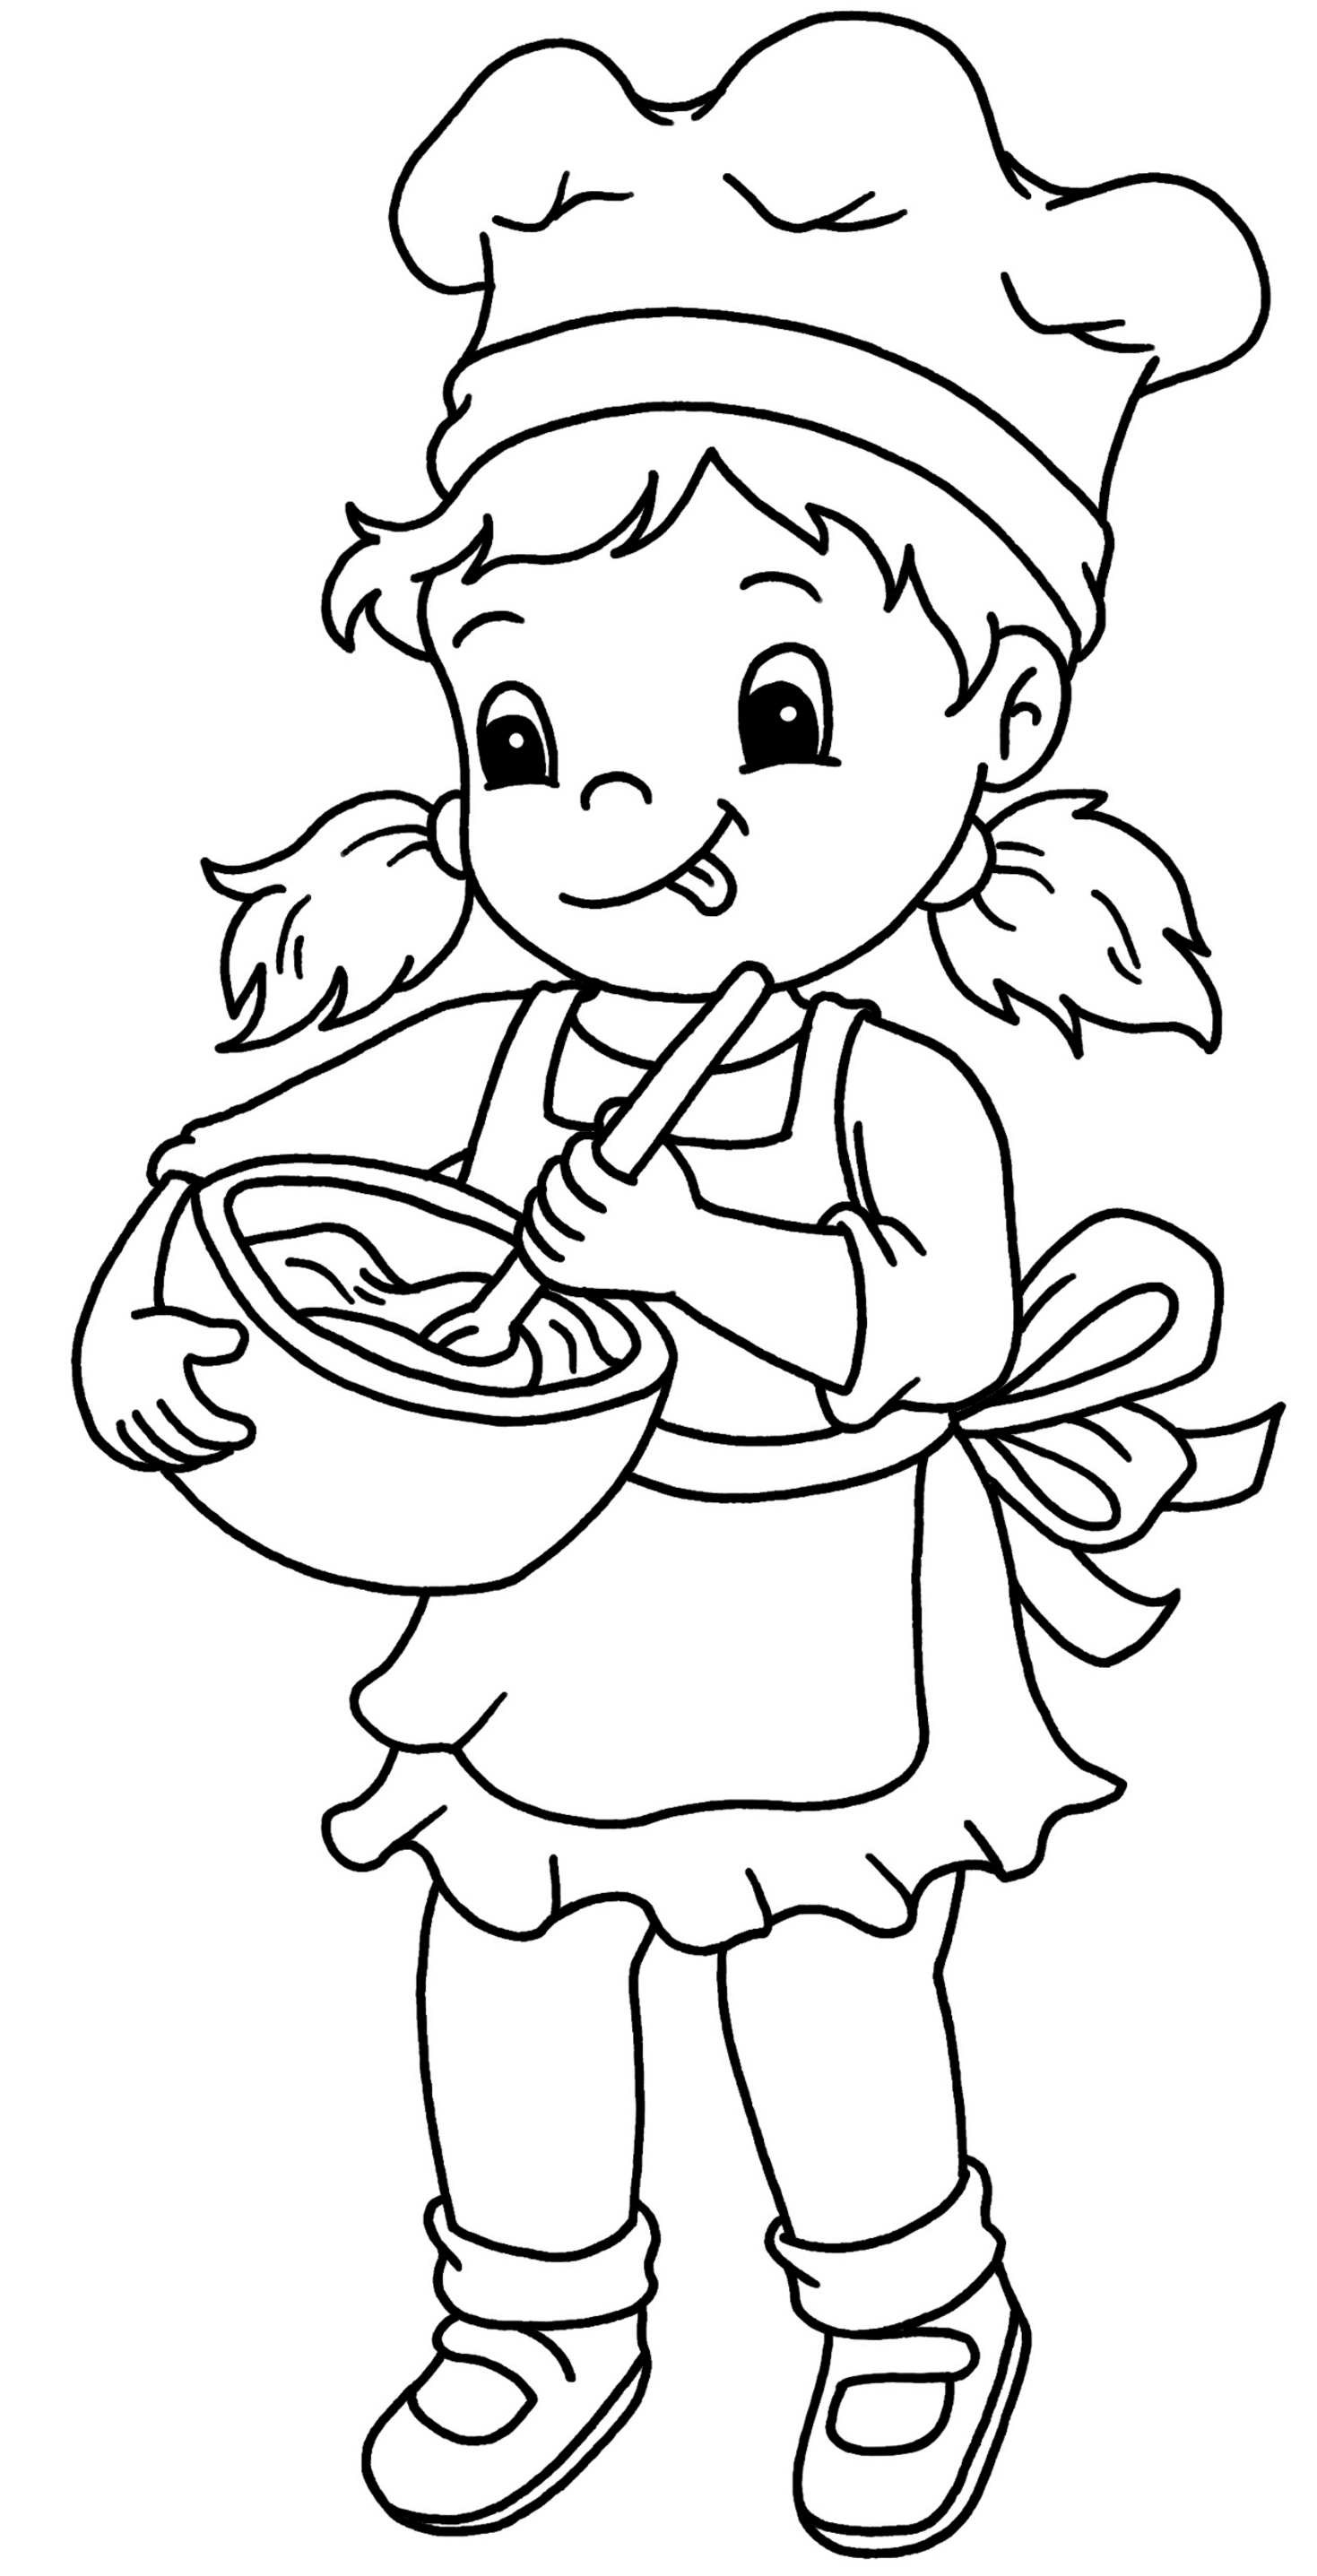 606 Animal Job Coloring Pages with Animal character